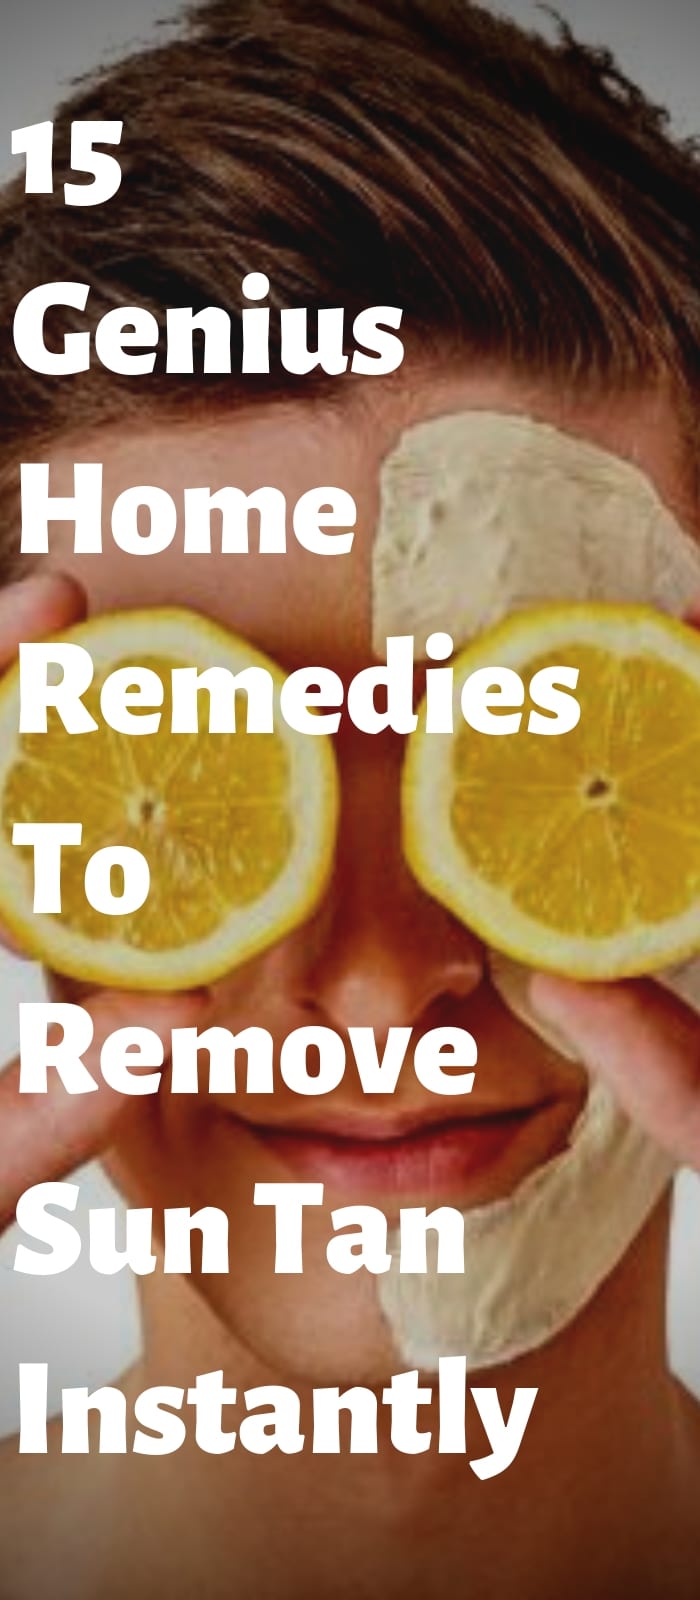 15 Genius Home Remedies To Remove Sun Tan Instantly